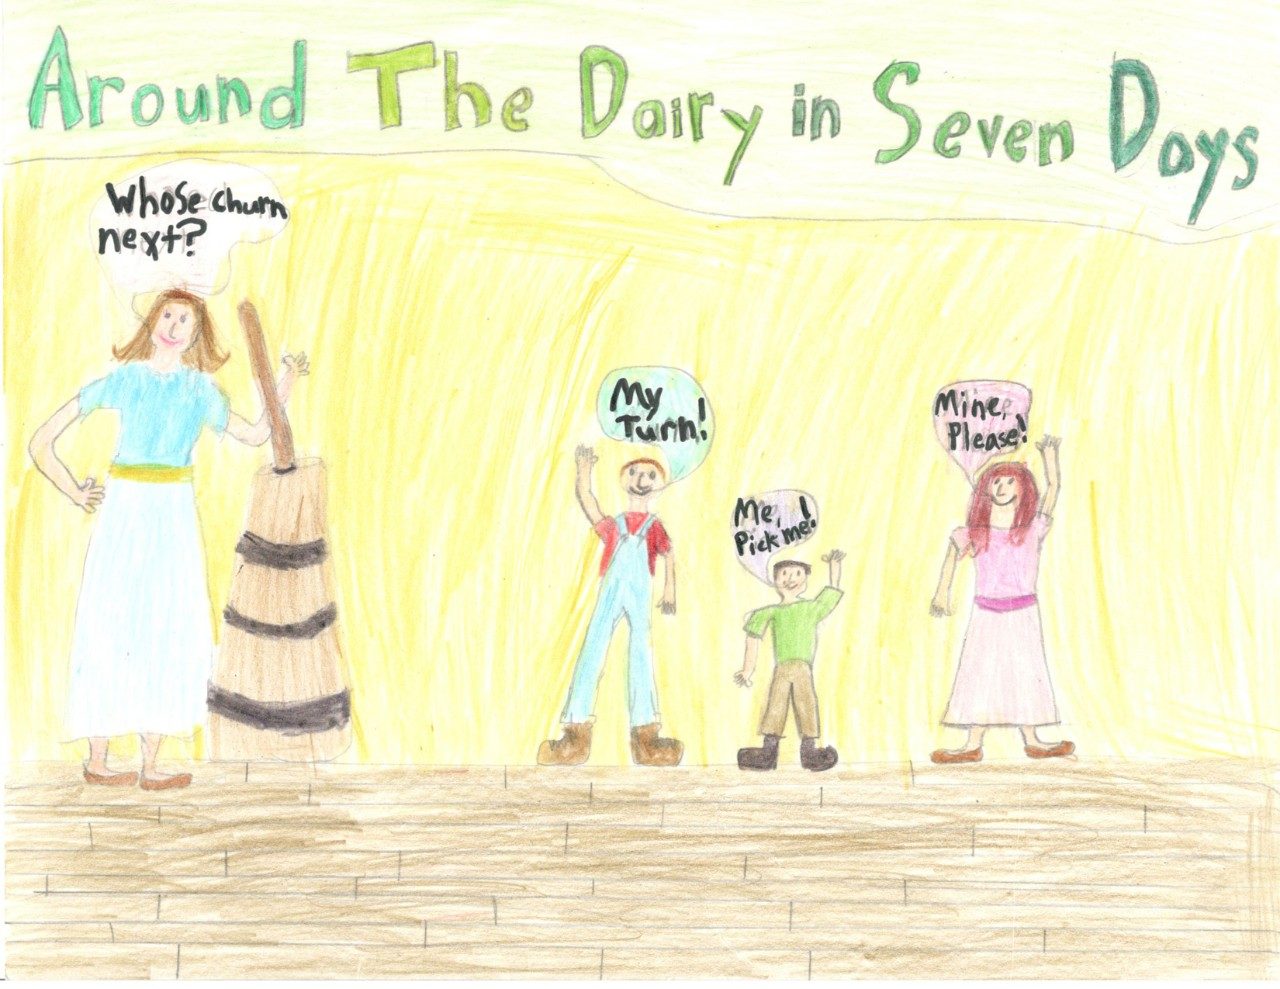 2023 June Dairy Month Poster Contest. Around the Dairy in 7 Days. Lucy Longtin, Henrico County, Junior Division. Second Place.